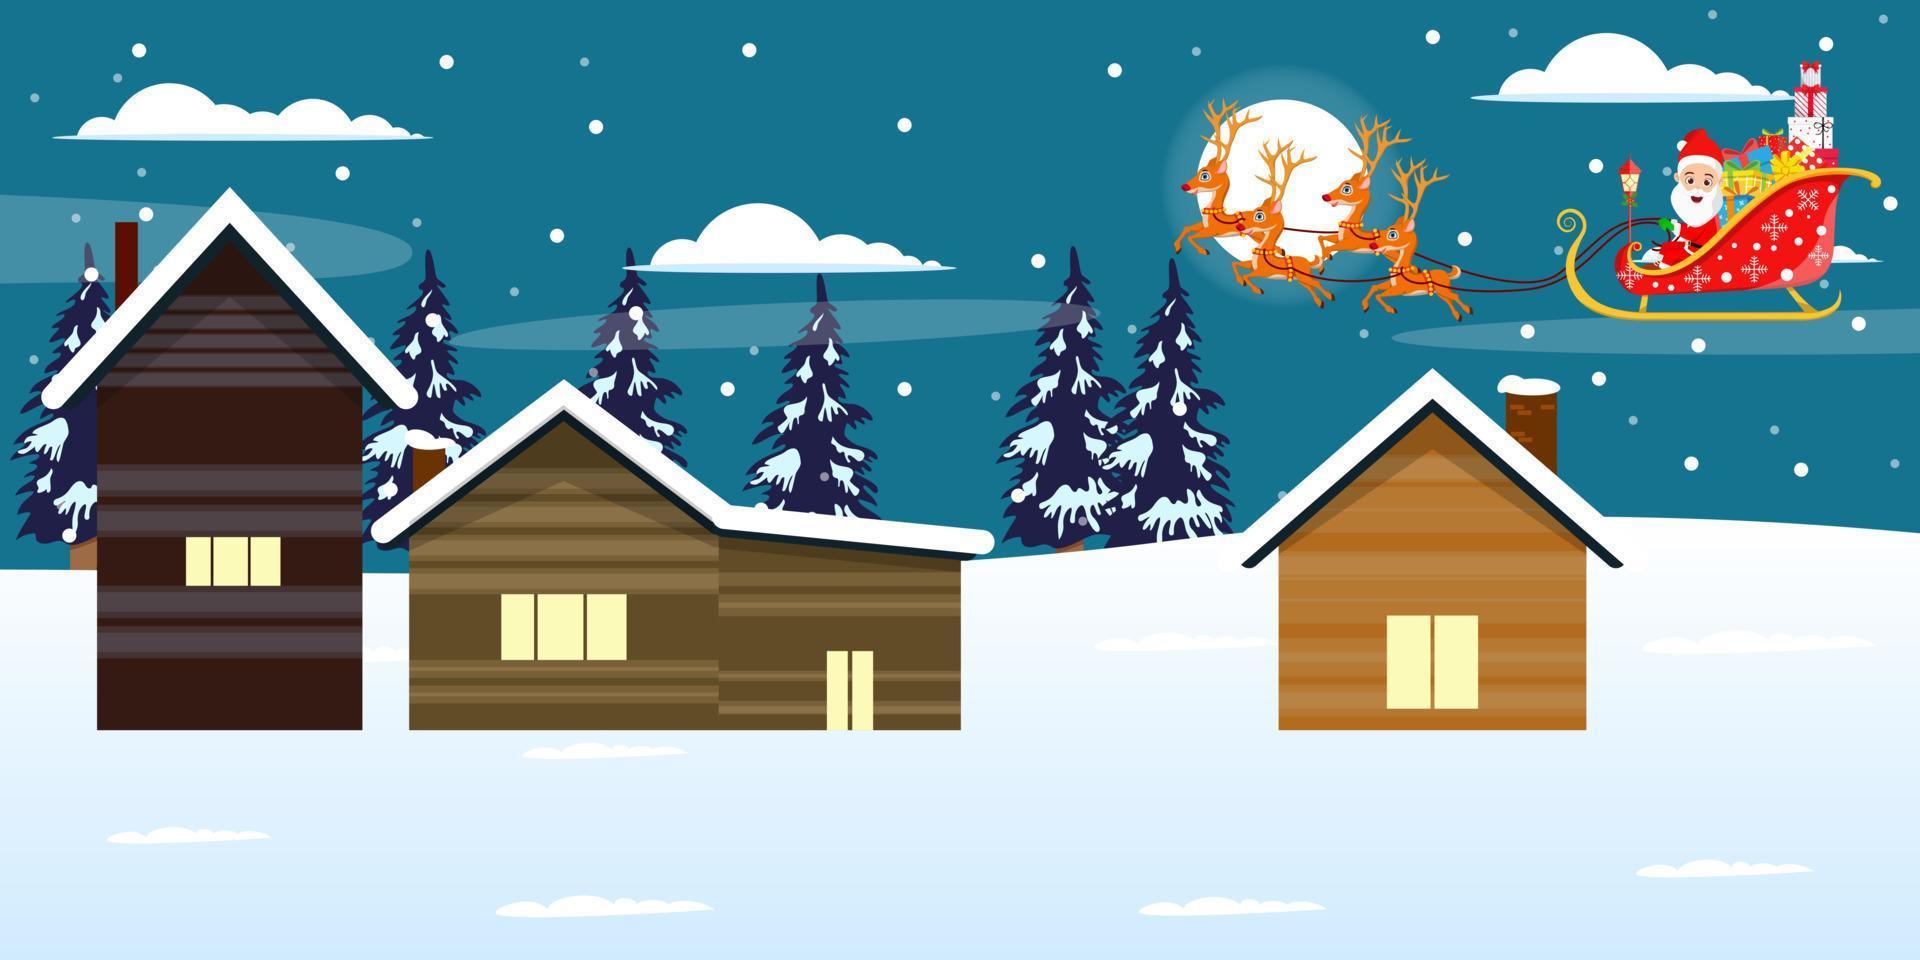 Cute beautiful Santa Clause character  flying on sky up on houses with sleigh with reindeer with gift boxes night background with trees snow falling with moon vector